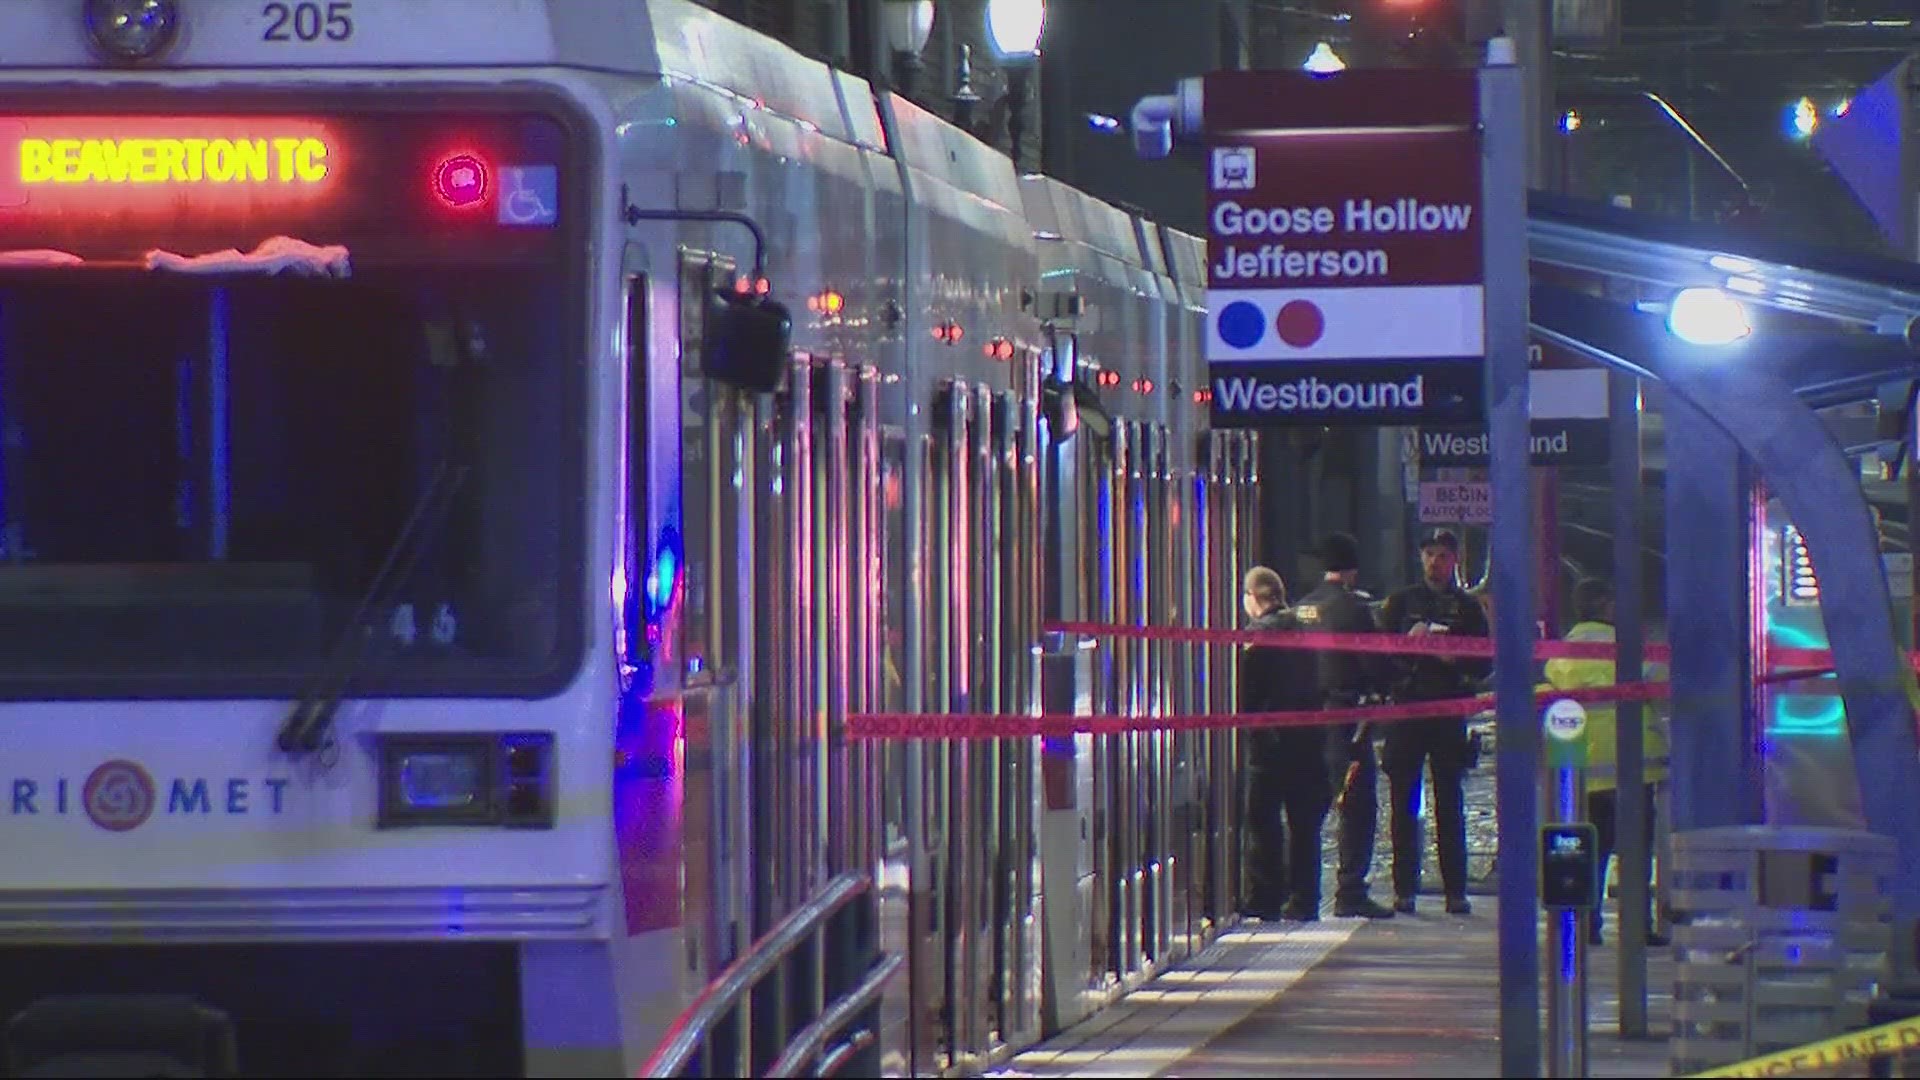 Police arrested Edel Cruz-Aragon, 22, for the fatal stabbing of Juan Francisco, 23, on Christmas Eve at the MAX train station in Portland’s Goose Hollow.